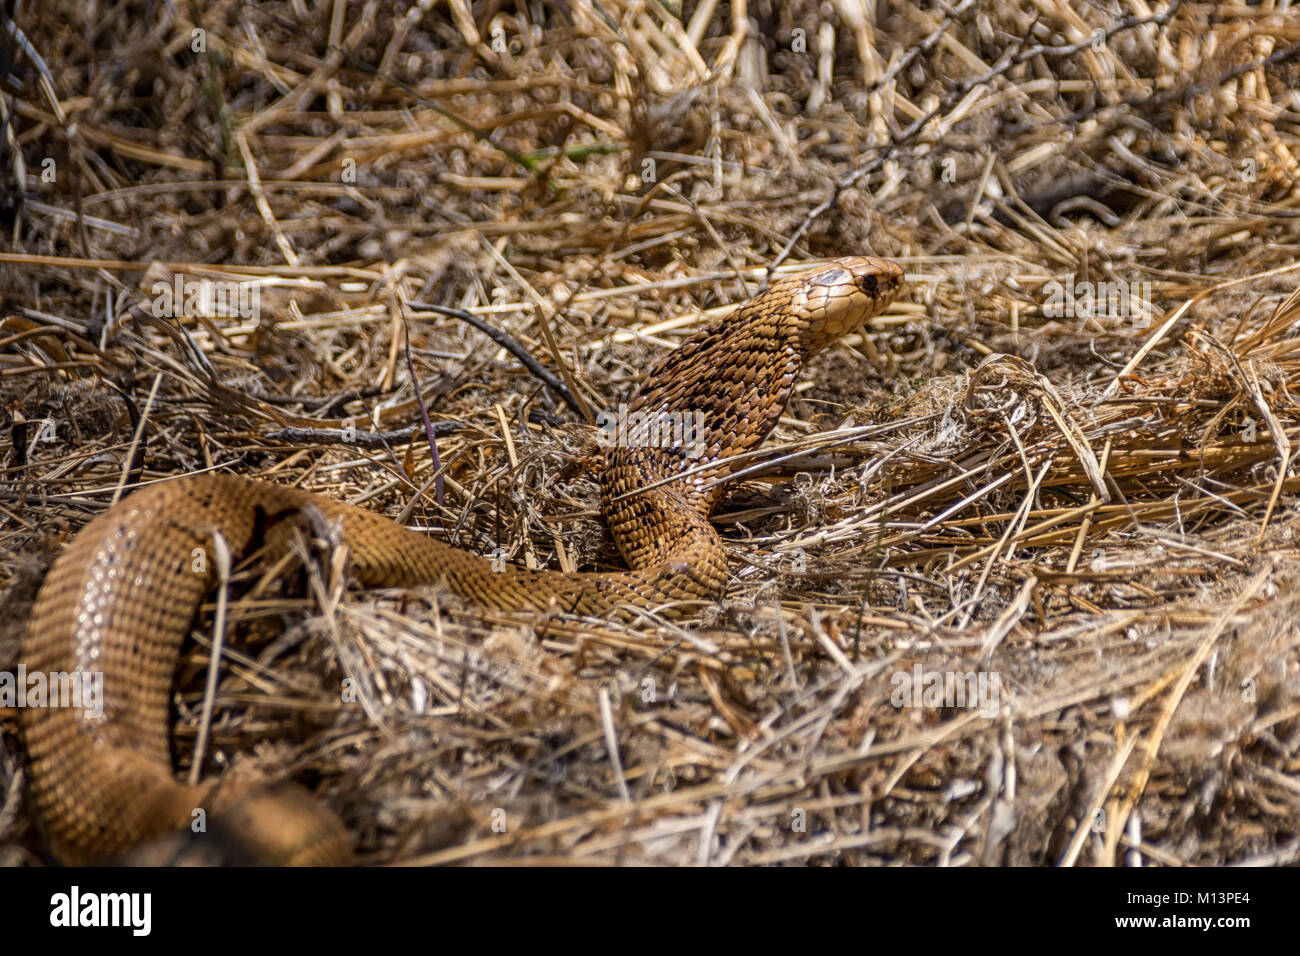 A Cape Cobra in grass in Southern African savanna Stock Photo